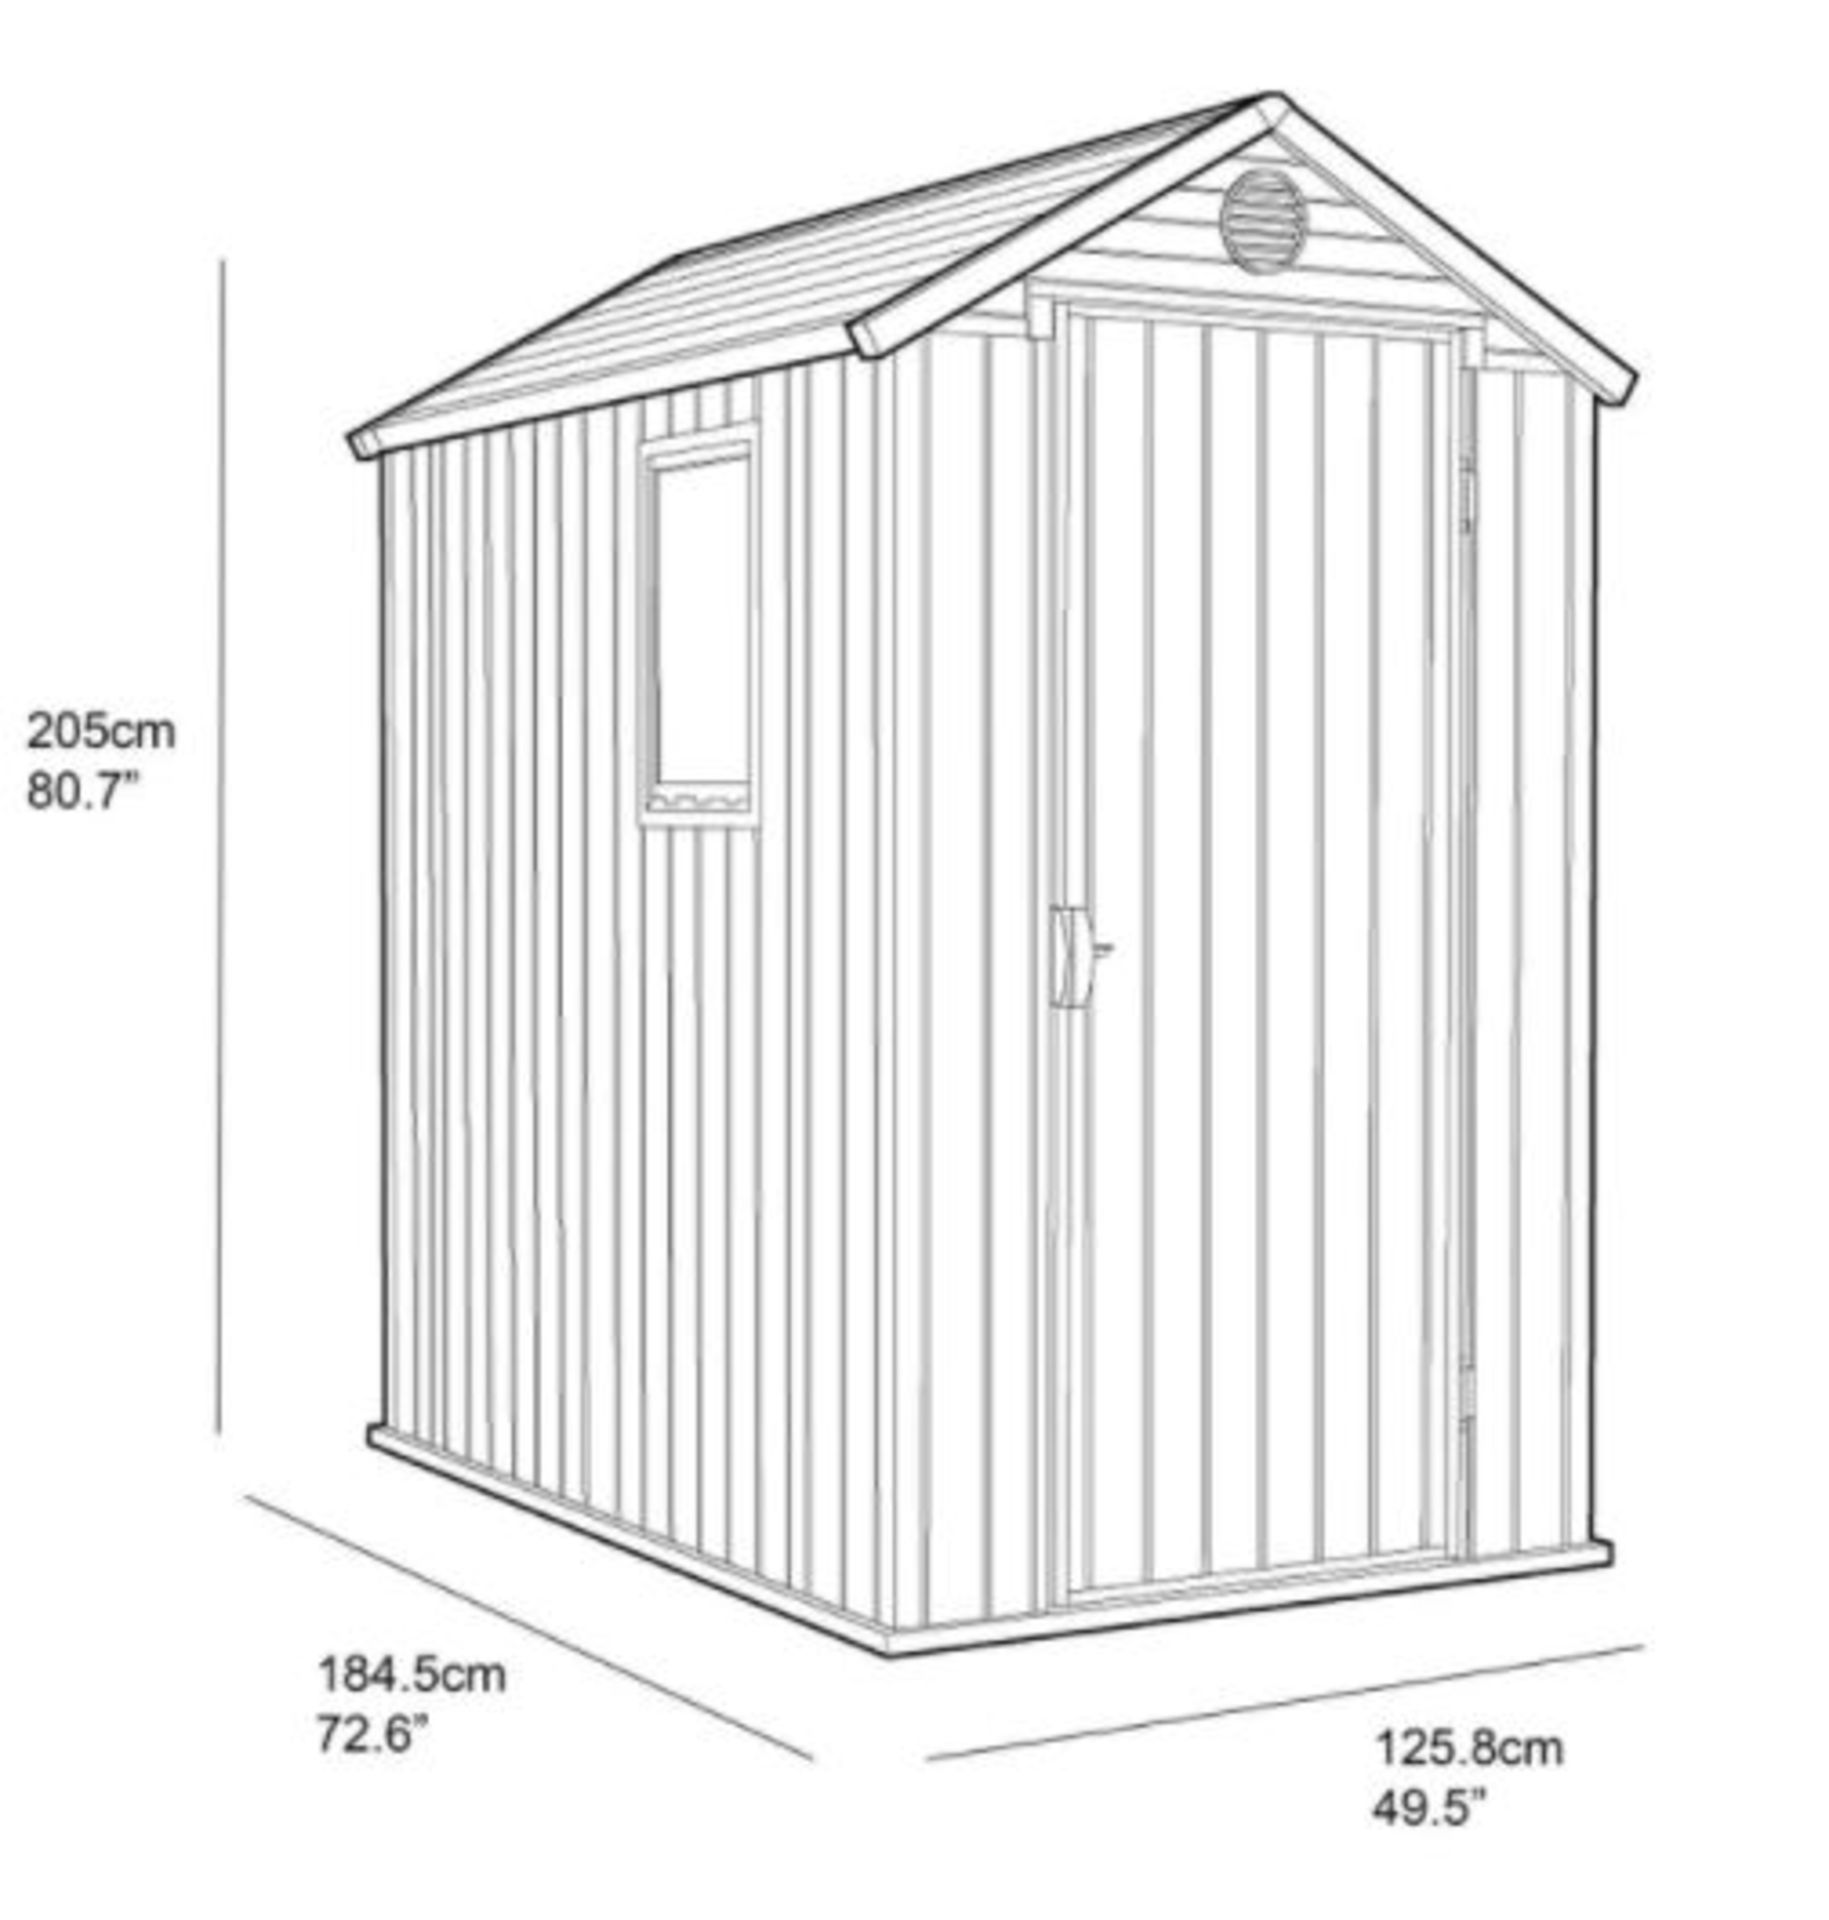 1x Keter Darwin 6 x 4ft Outdoor Plastic Garden Shed Brown RRP £340. External Dimensions (H)205 x - Image 5 of 6